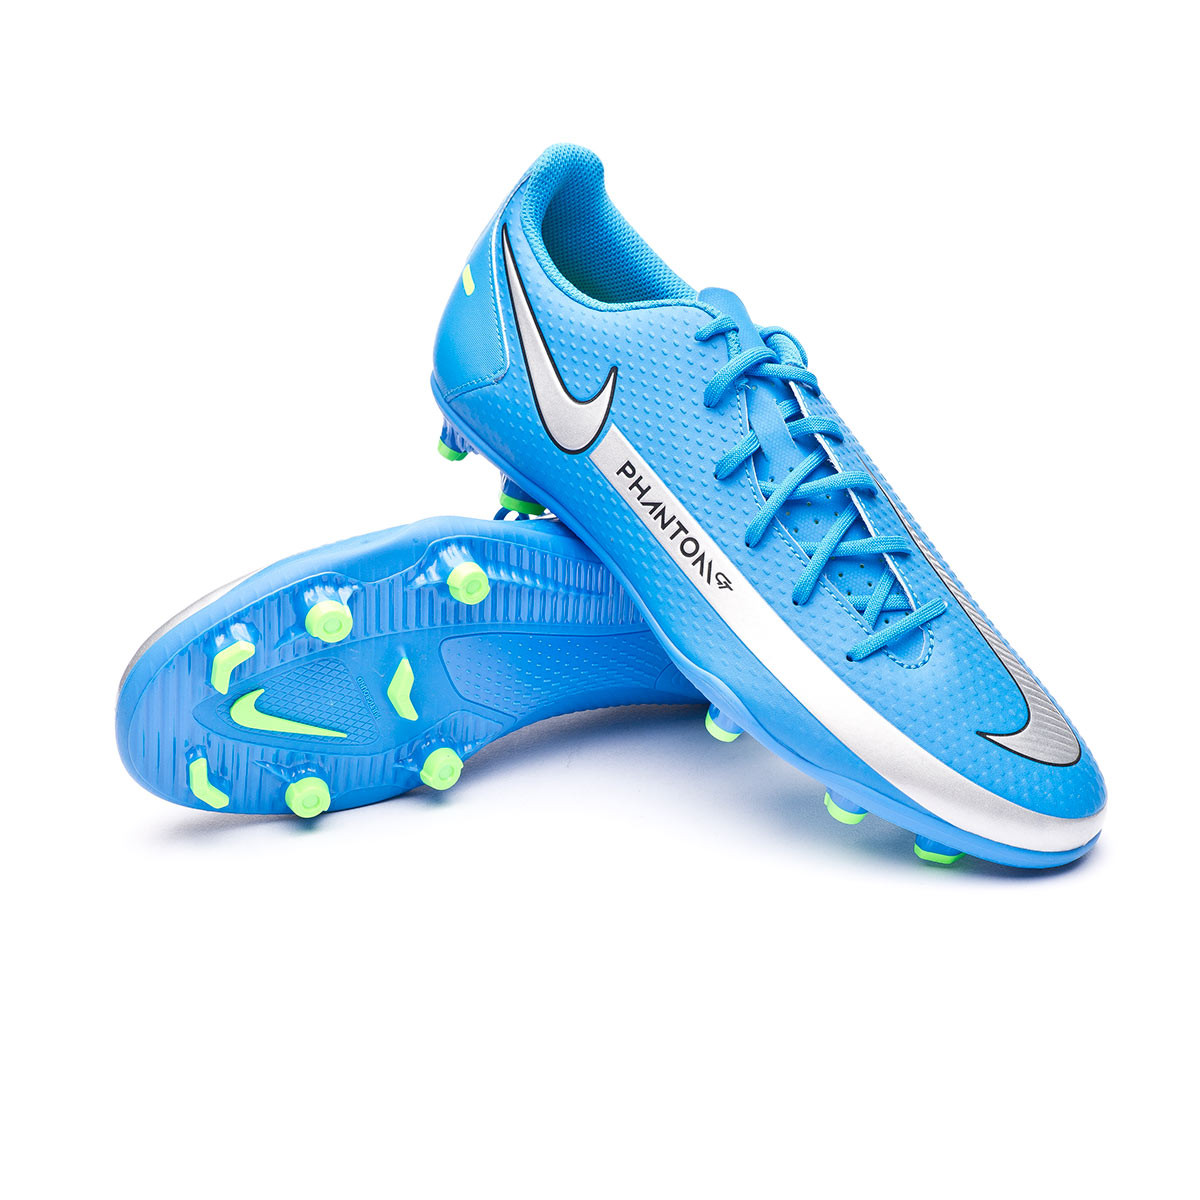 blue and silver nike football boots